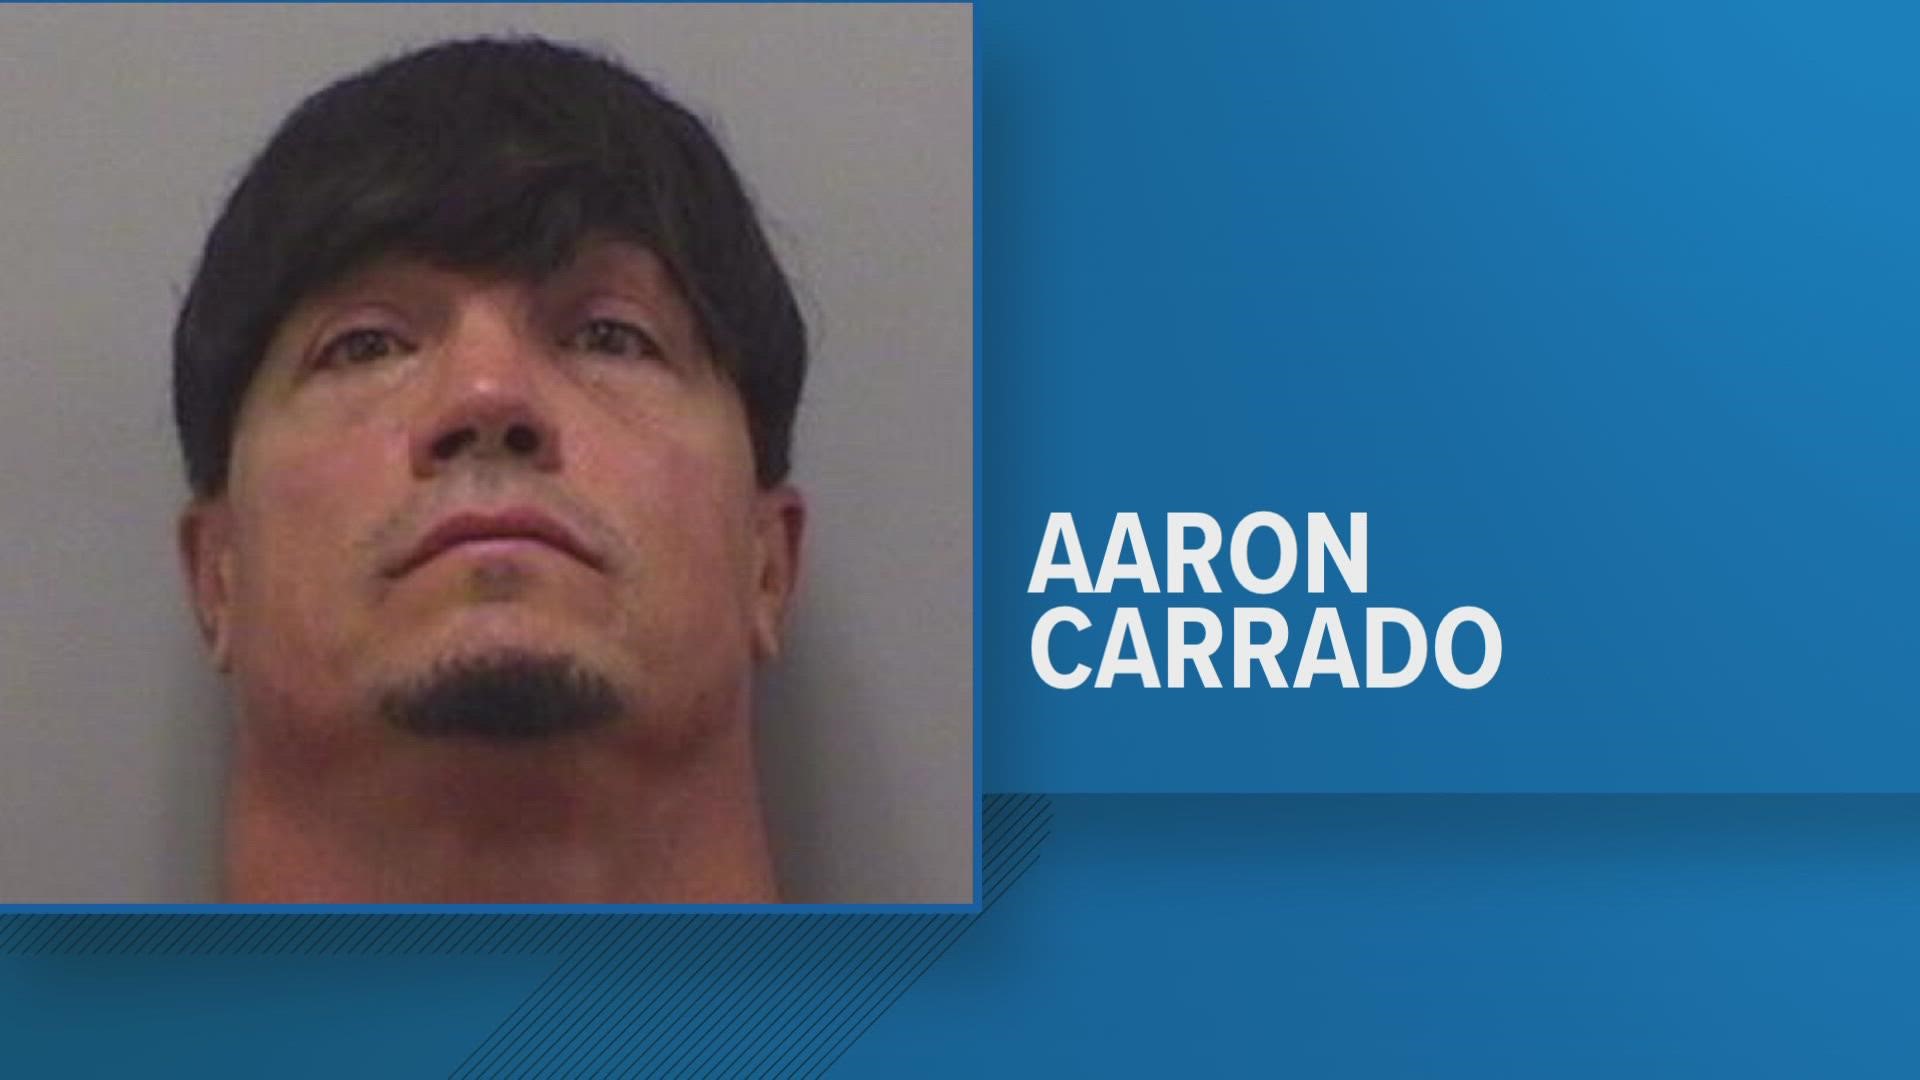 Aaron Carrado, who is the owner of Strength in Christ Athletes, was arrested on suspicion of multiple child sex assault charges, Parker Police said.